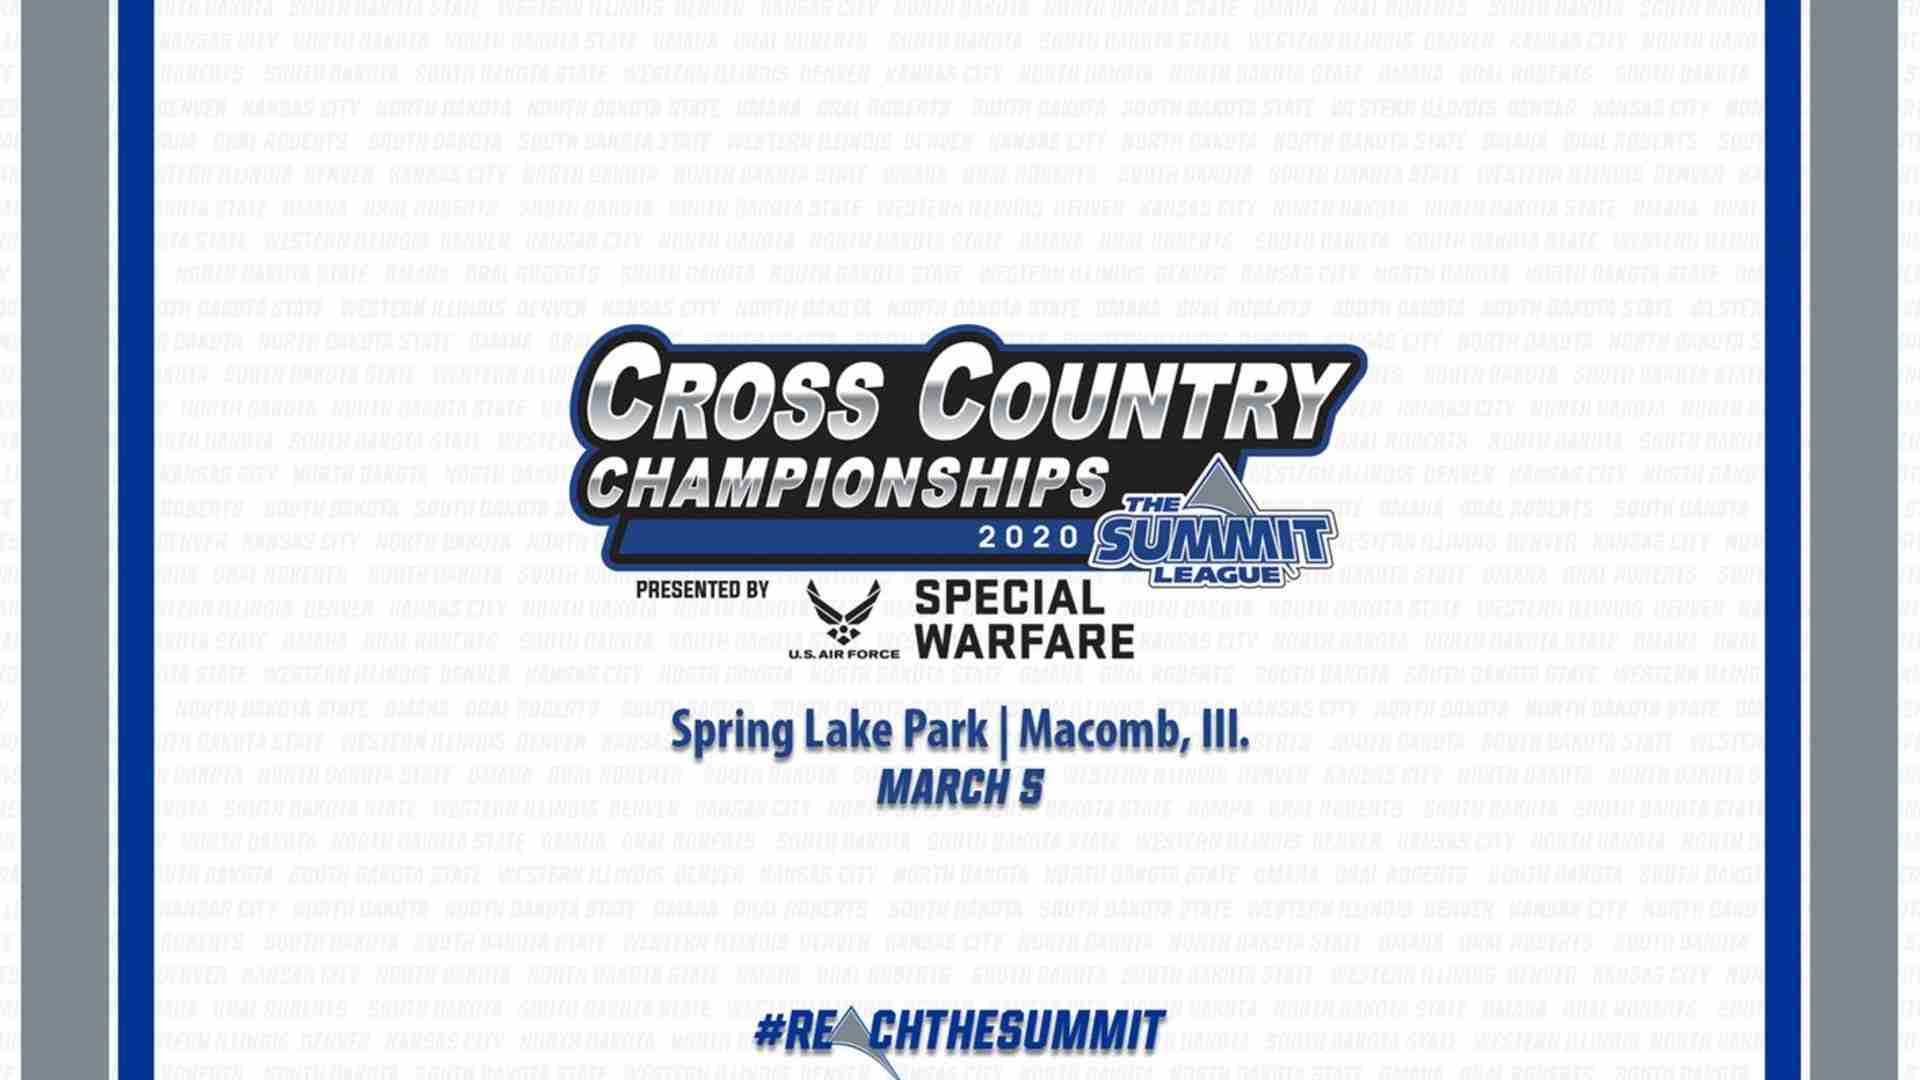 Where To Watch Summit League Cross Country Championships